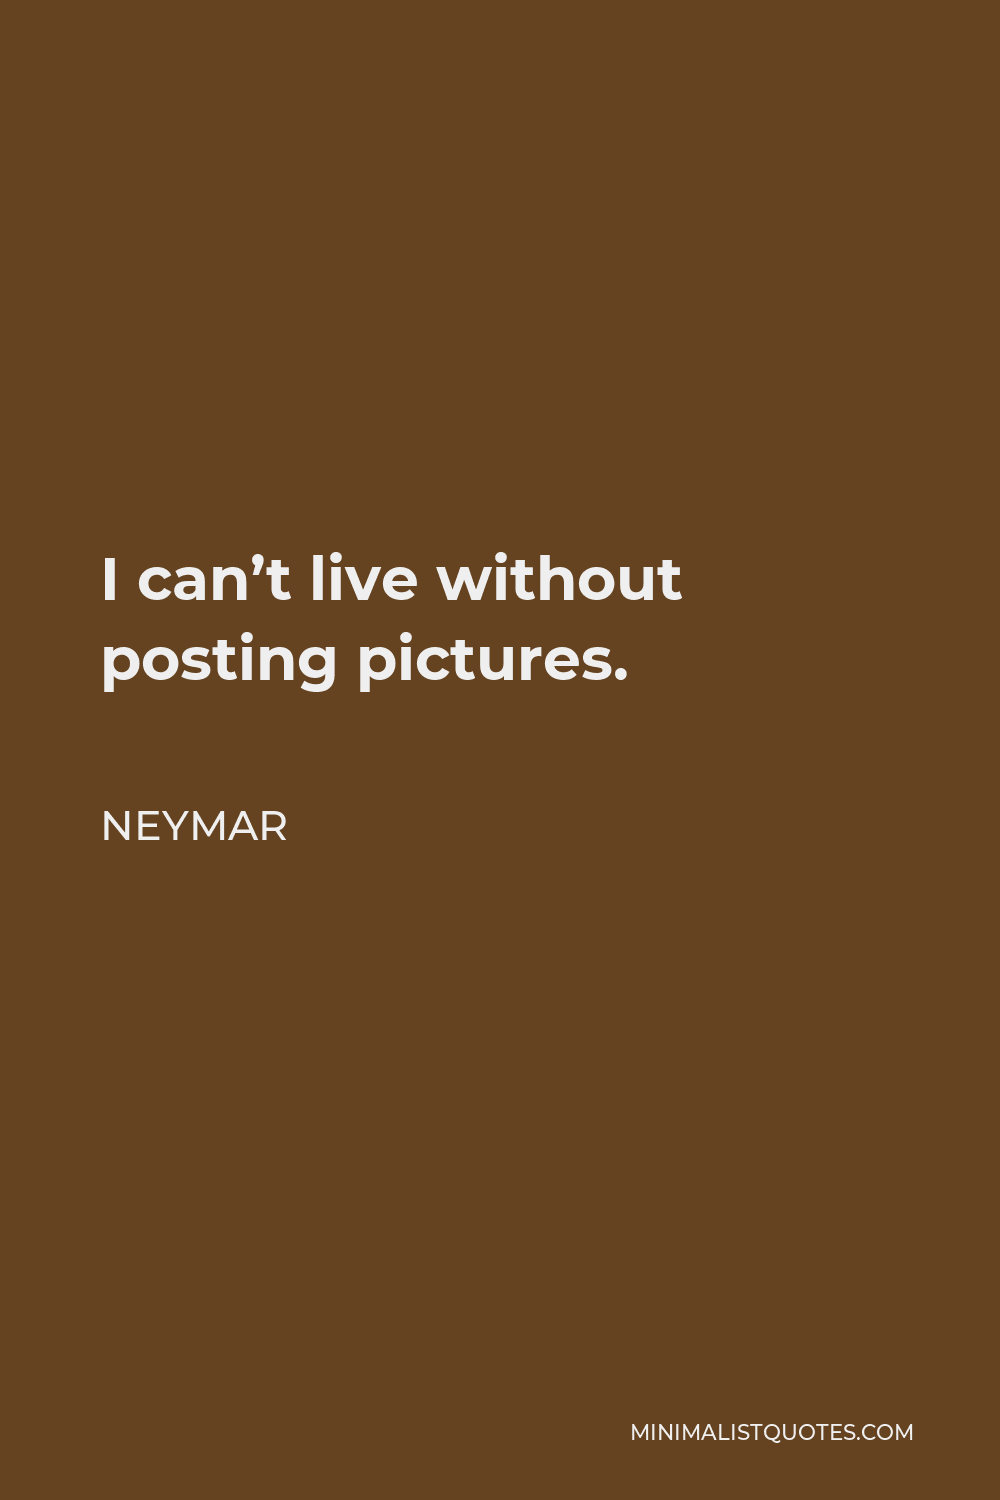 Neymar Quote - I can’t live without posting pictures.